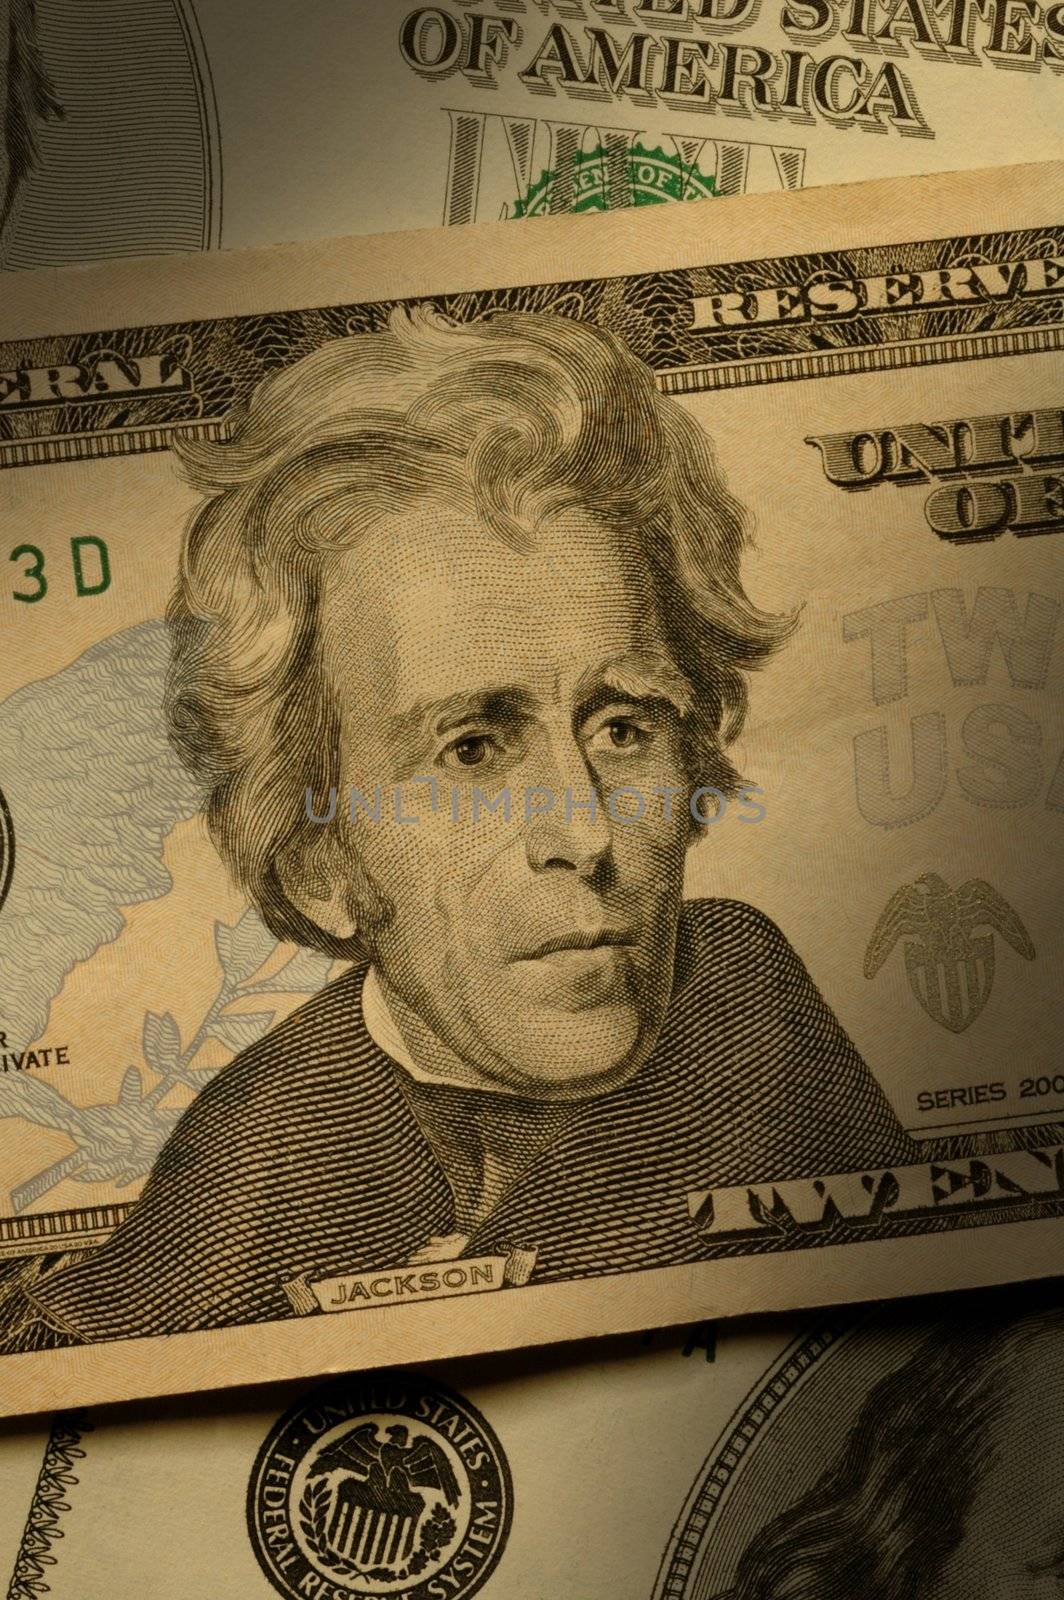 Close-up of Andrew Jackson on the $20 bill, dramatically lit.